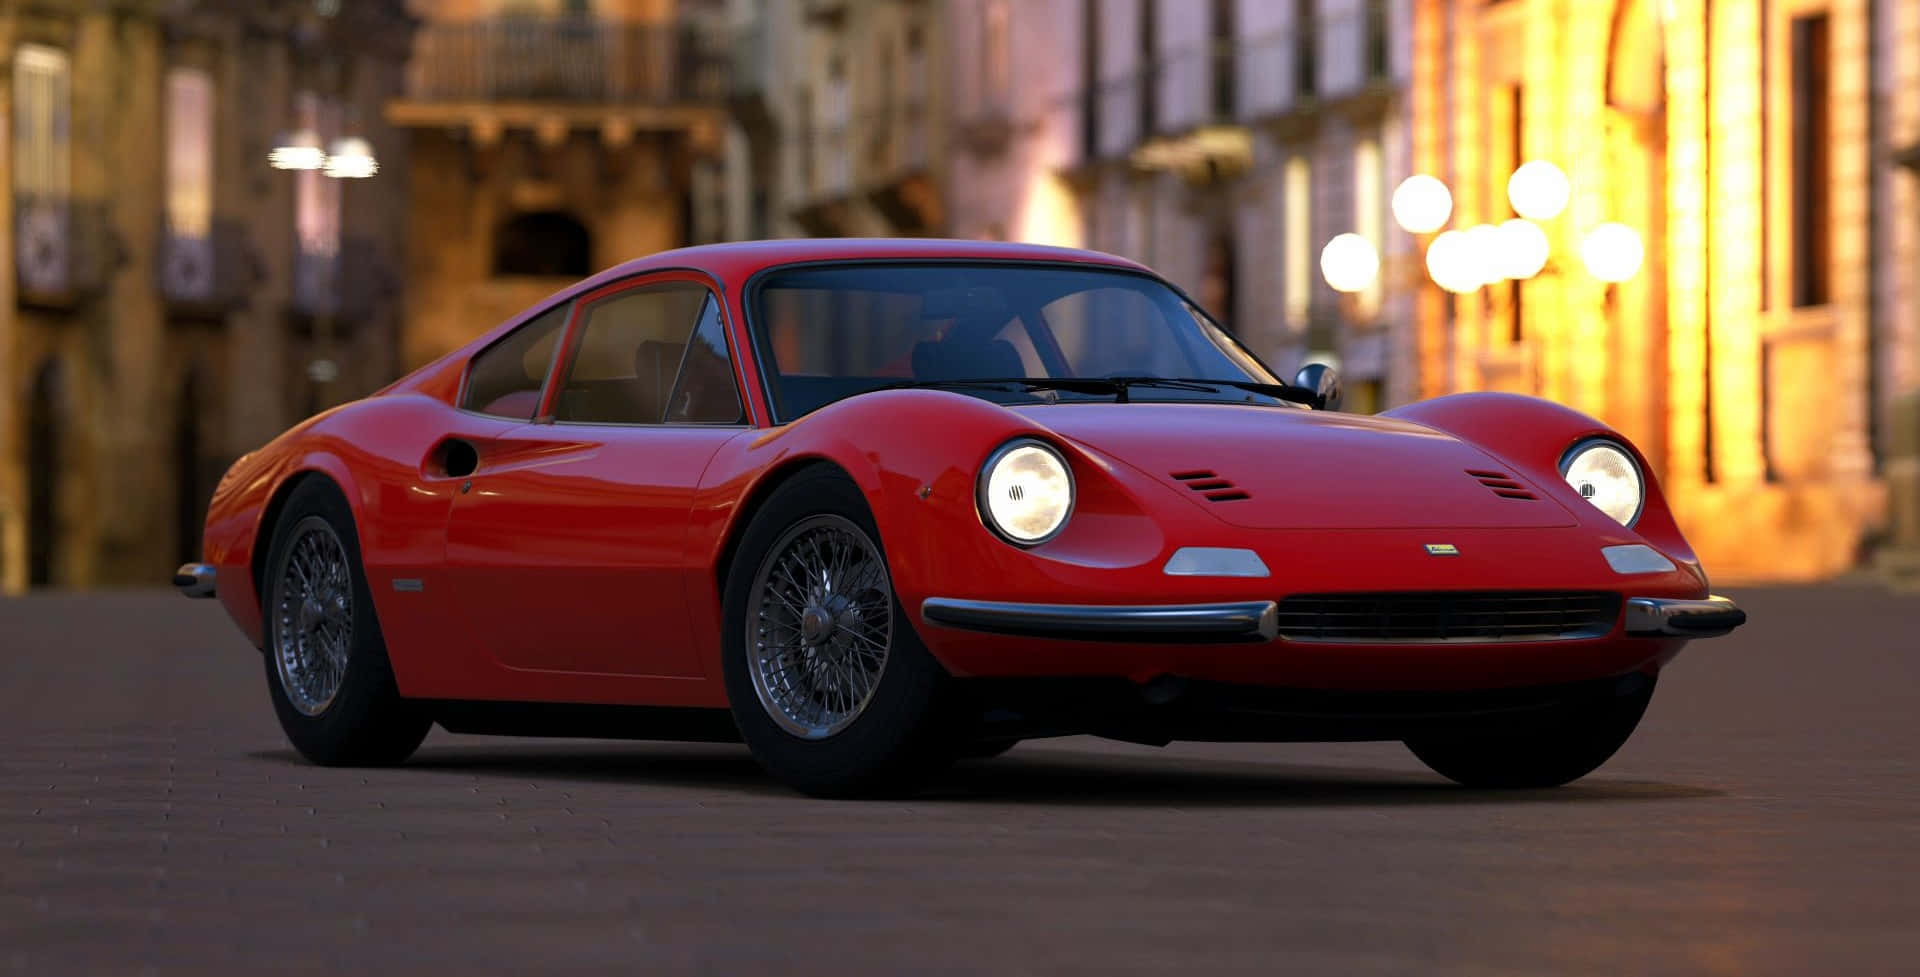 This vintage Ferrari is a showstopper Wallpaper